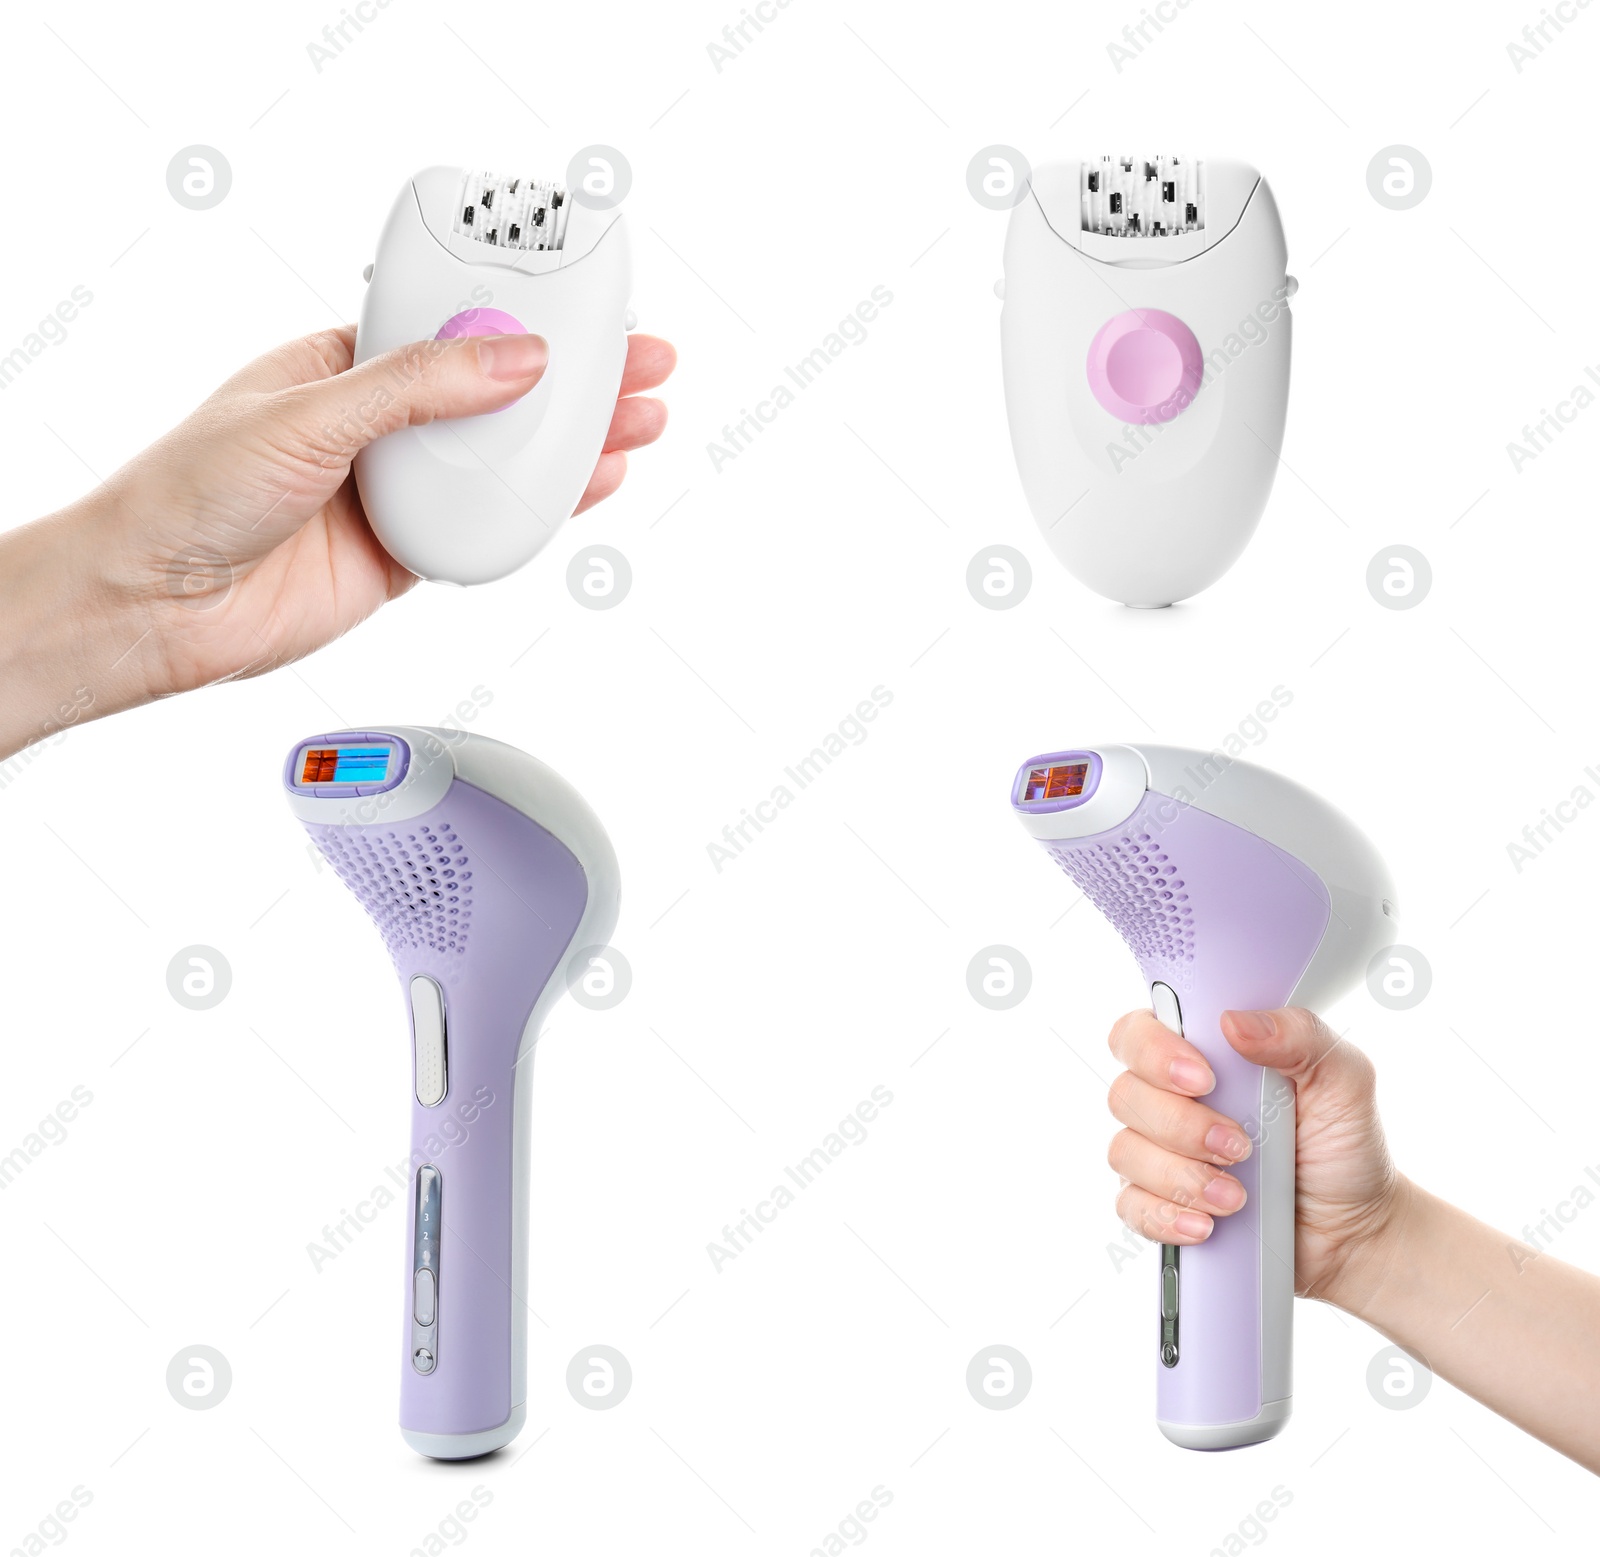 Image of Collage of devices for epilation on white background